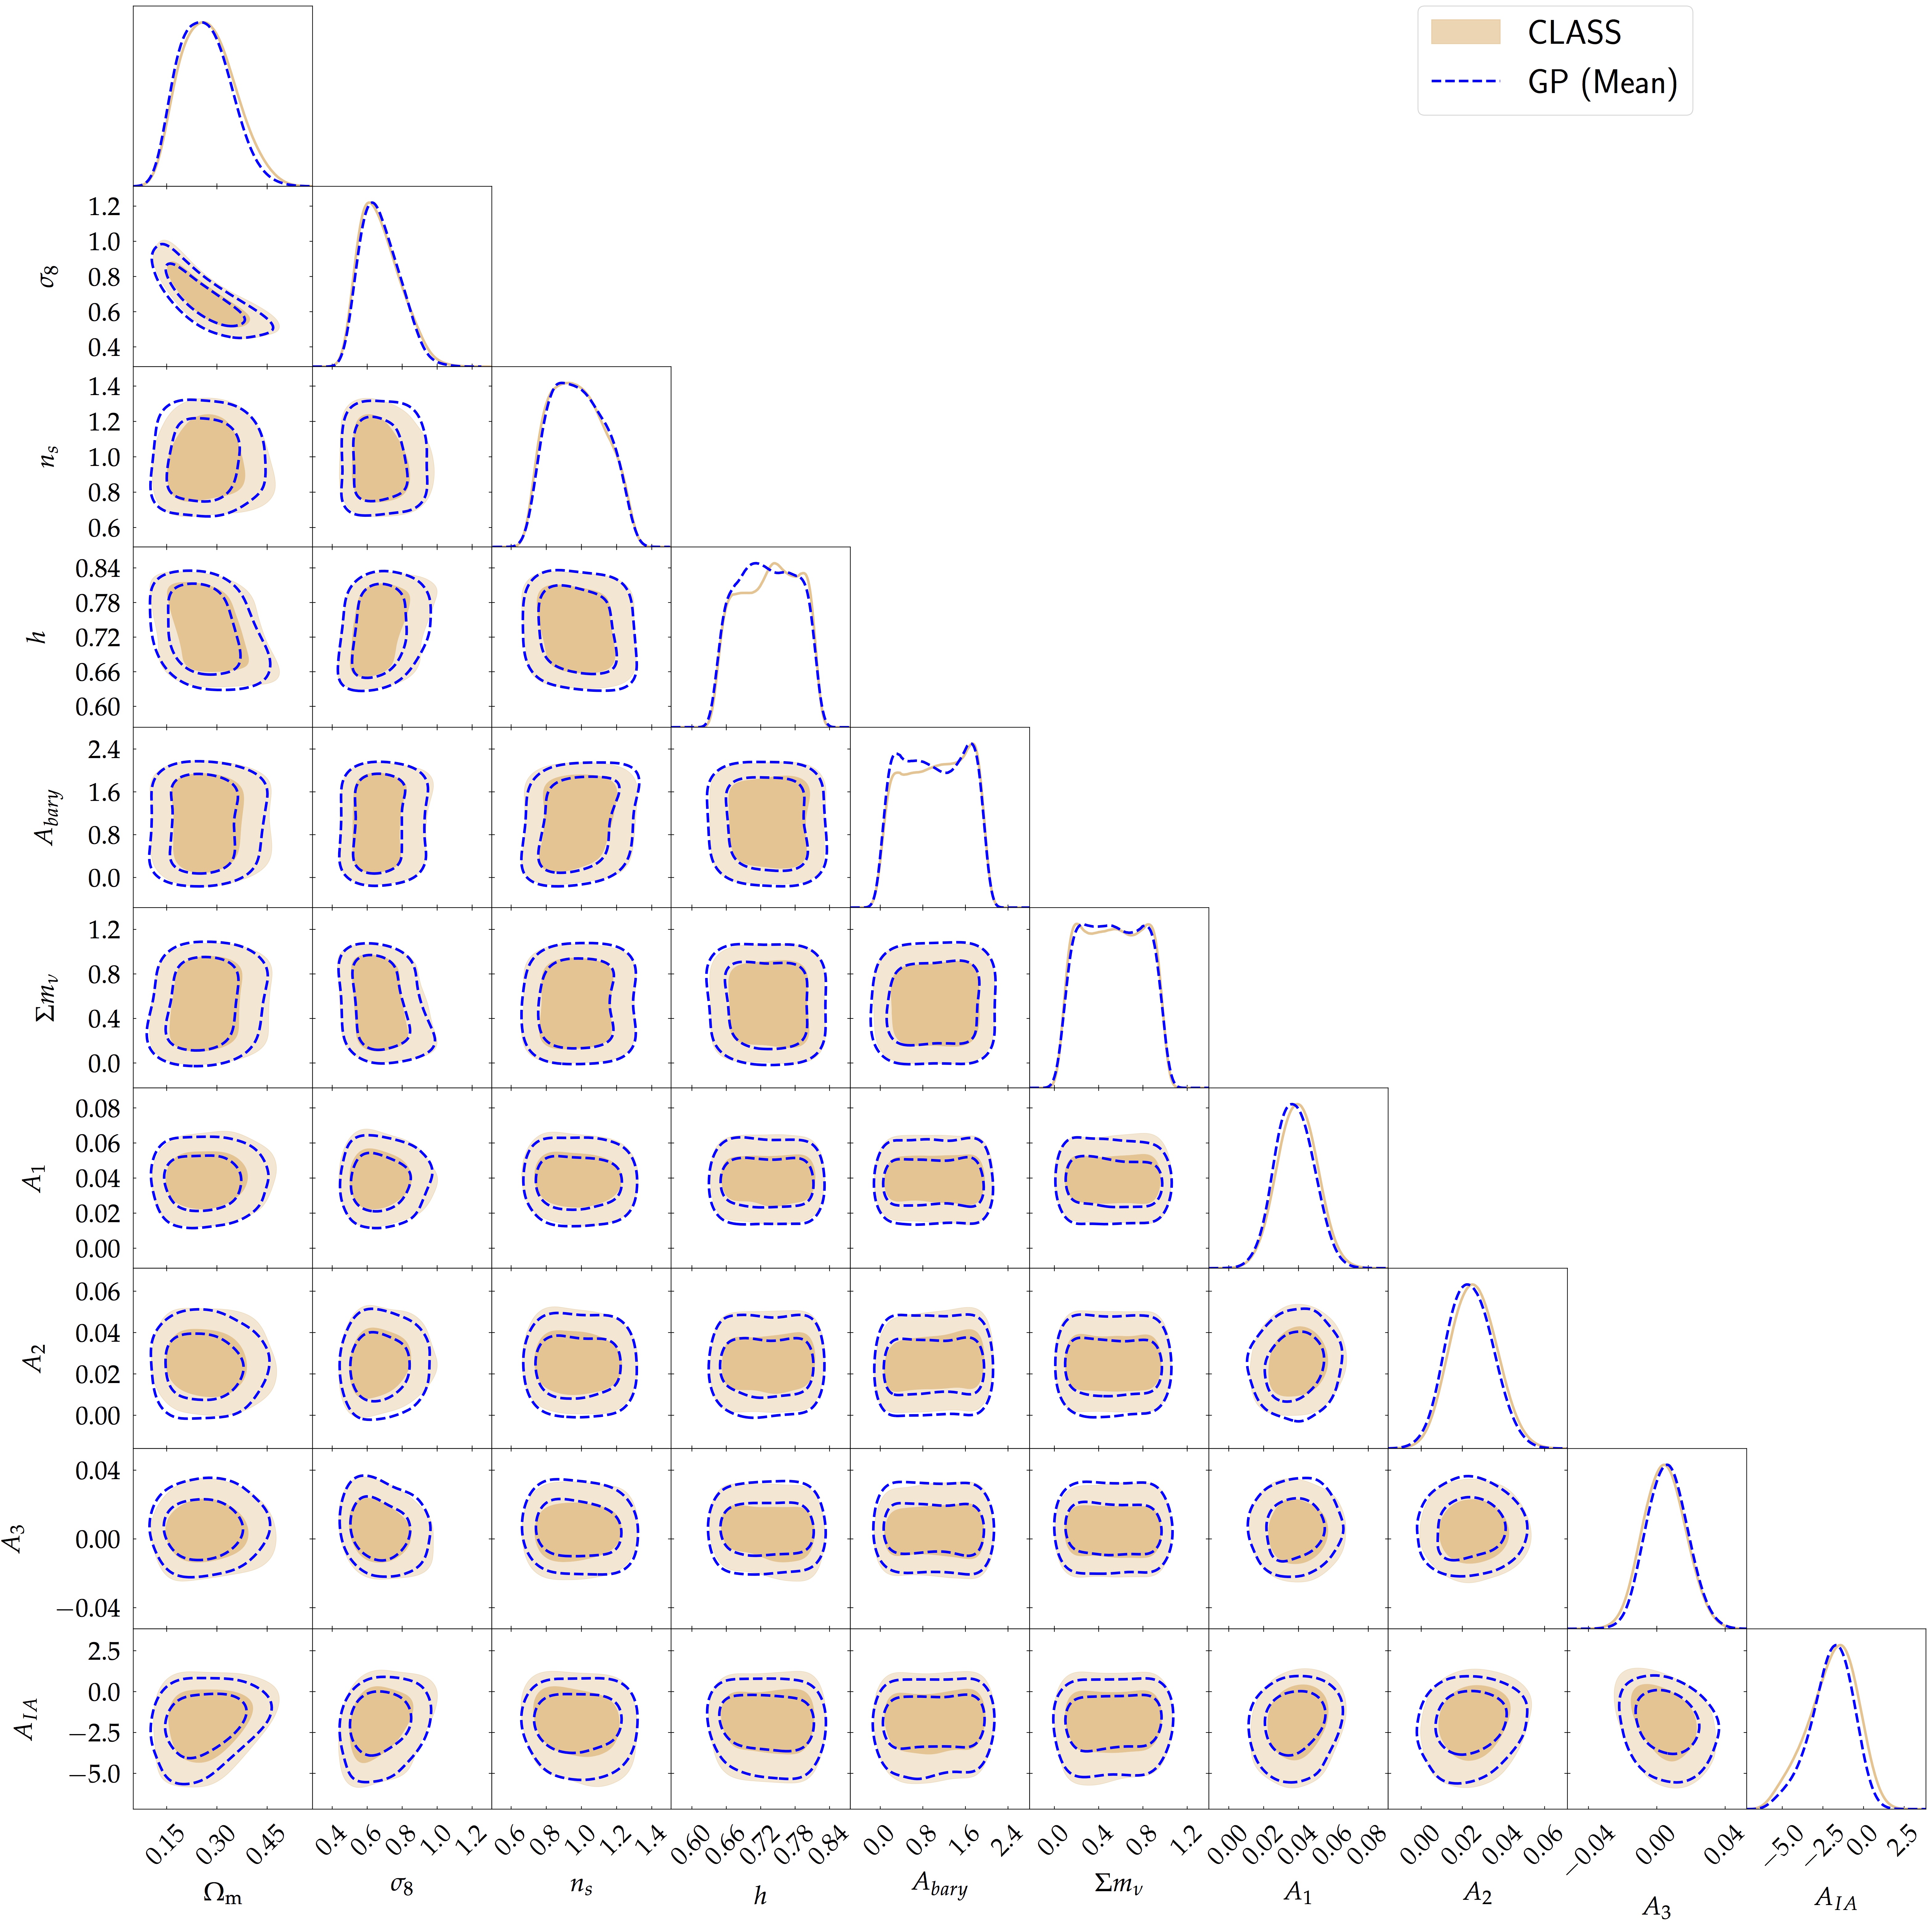 The full posterior distribution of all parameters using the MOPED compression scheme.